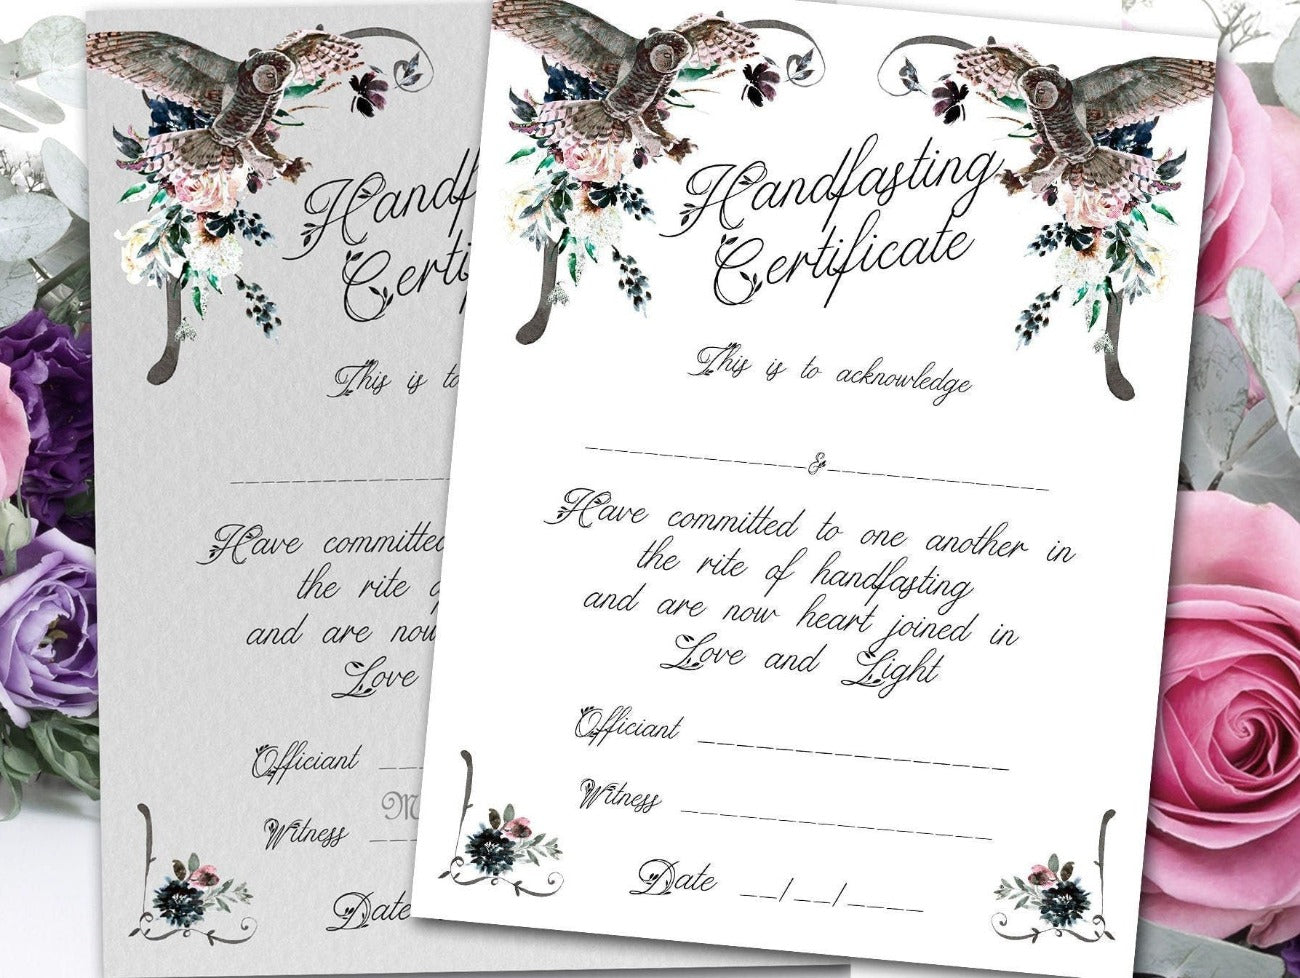 OWL HANDFASTING CERTIFICATE, Printable Wicca Pagan Wedding Certificate, Pagan Marriage Ritual, Jump the Broom, Witchcraft Cord Binding Vows - Morgana Magick Spell